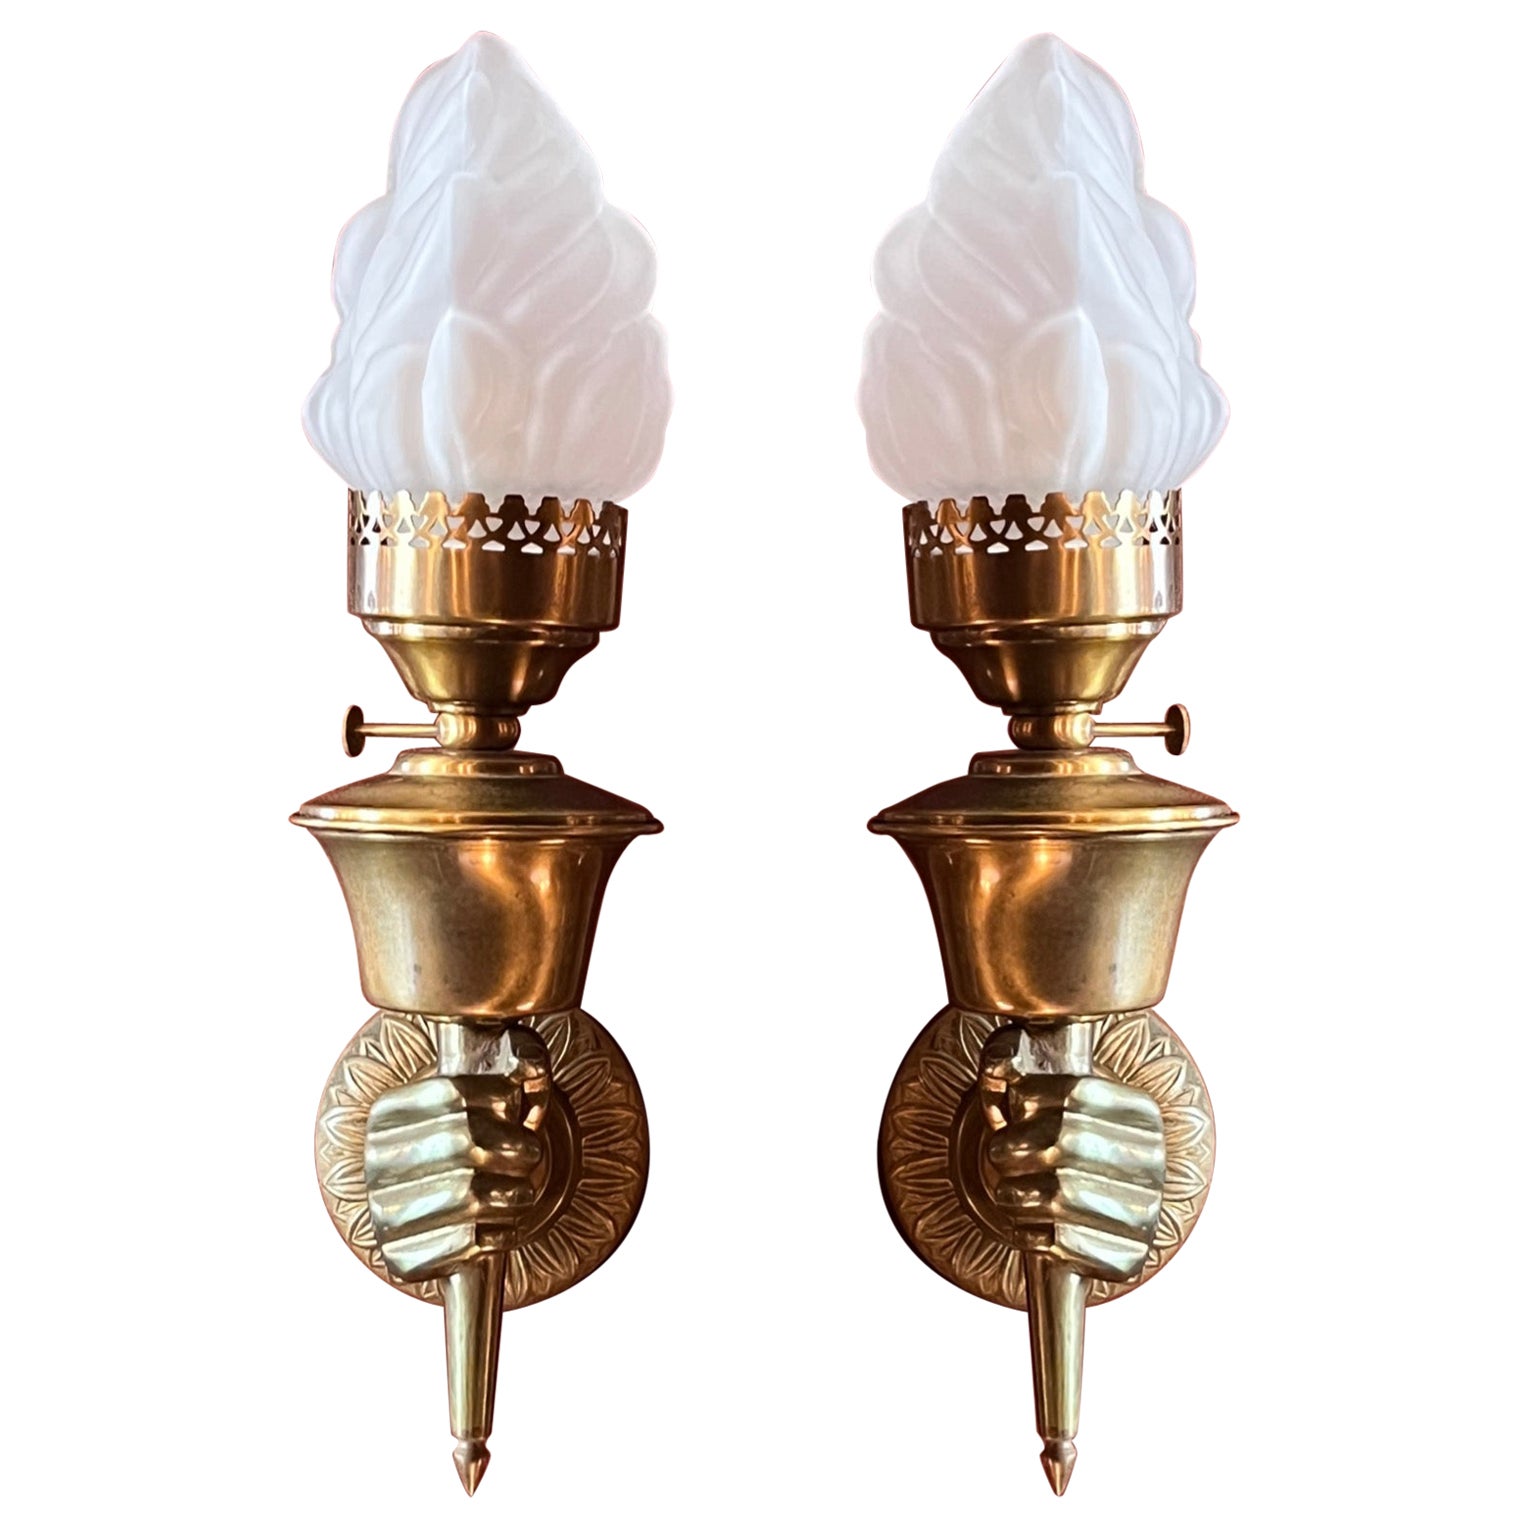 Pair Estate Brass & Glass Wall Light Sconces in Figural Hands, Circa 1940s-1950s